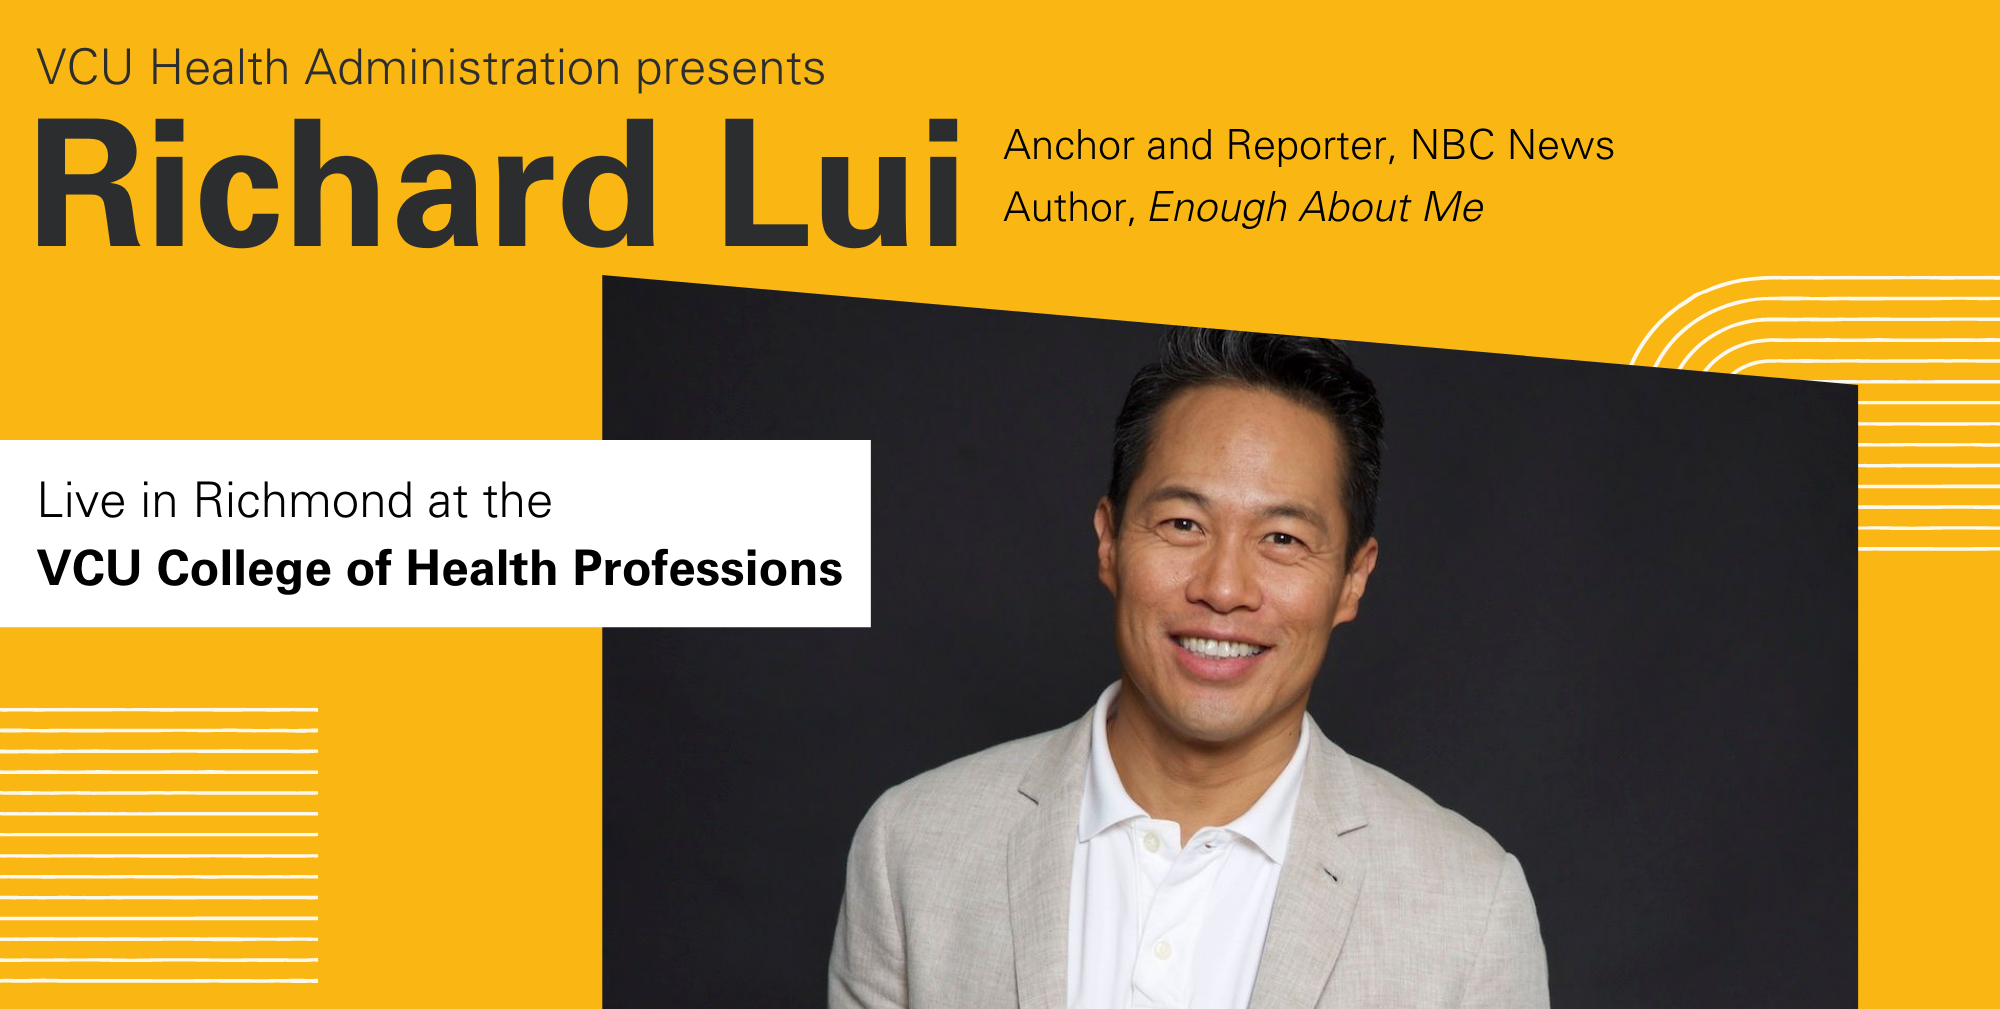 Richard Lui, Anchor and Reporter of NBC News, Author of "Enough About Me" live in Richmond at the VCU College of Health Professions.